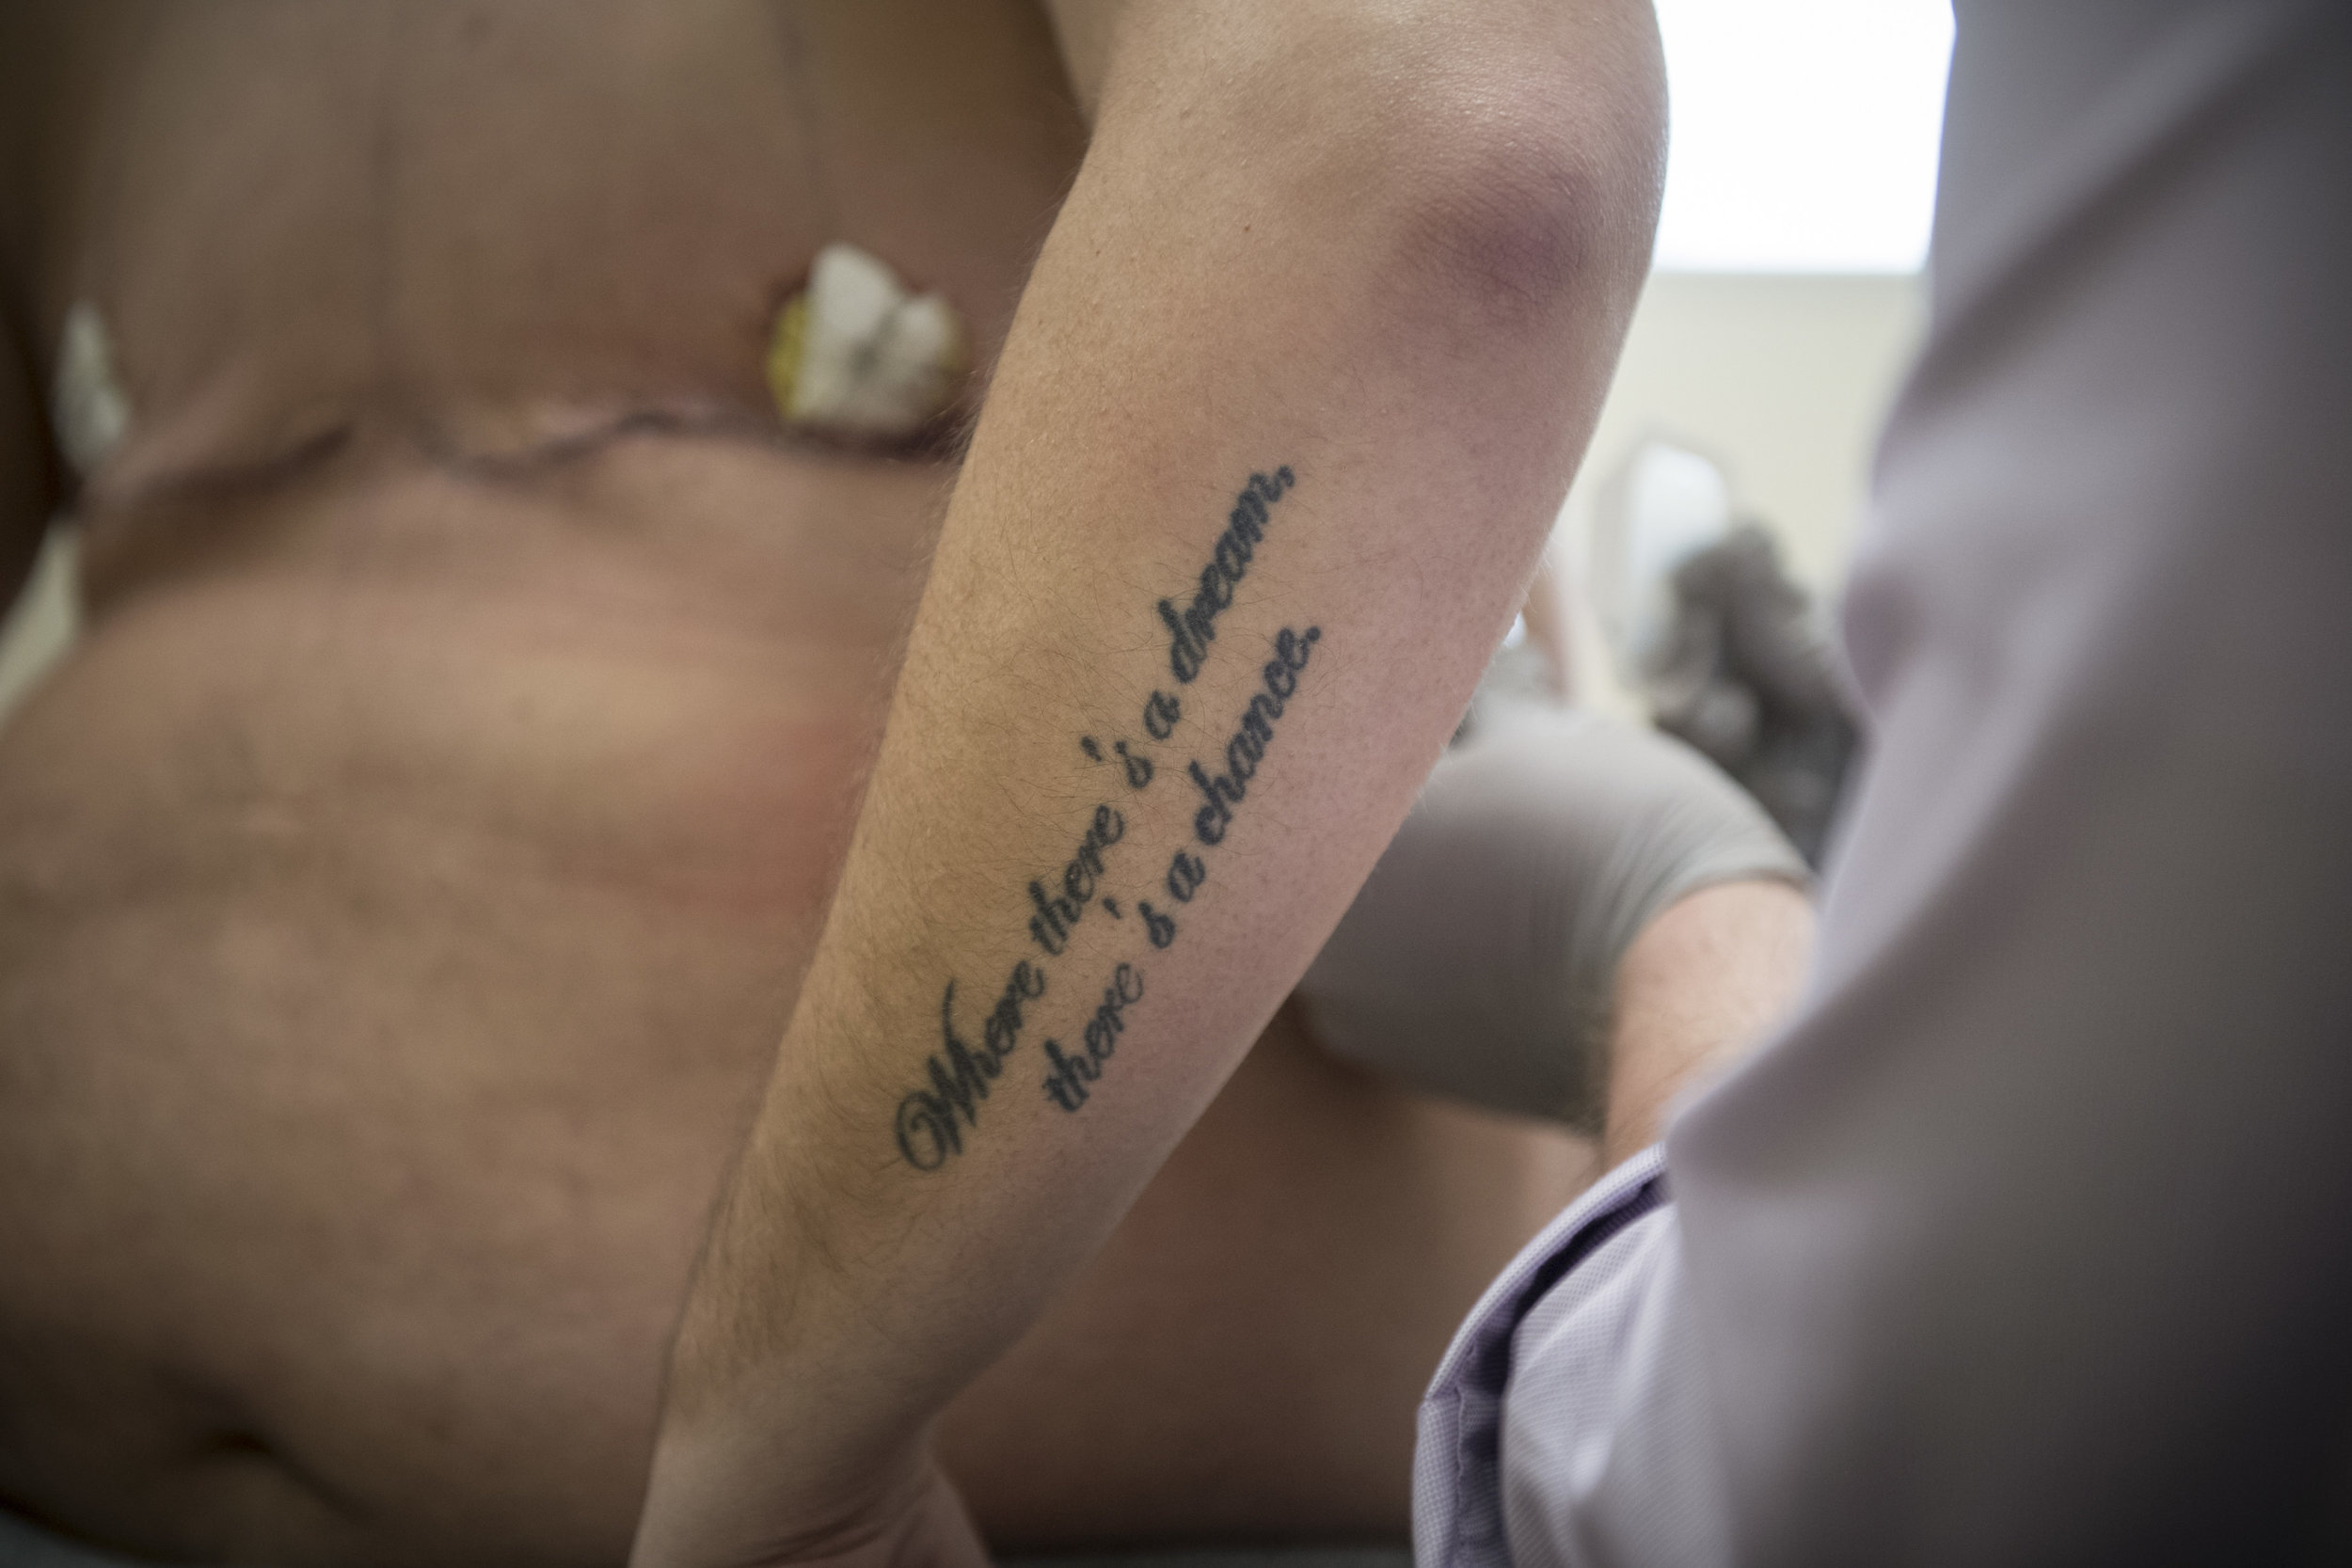  A tattoo on Beau’s arm reads "where there's a dream, there's a chance." 